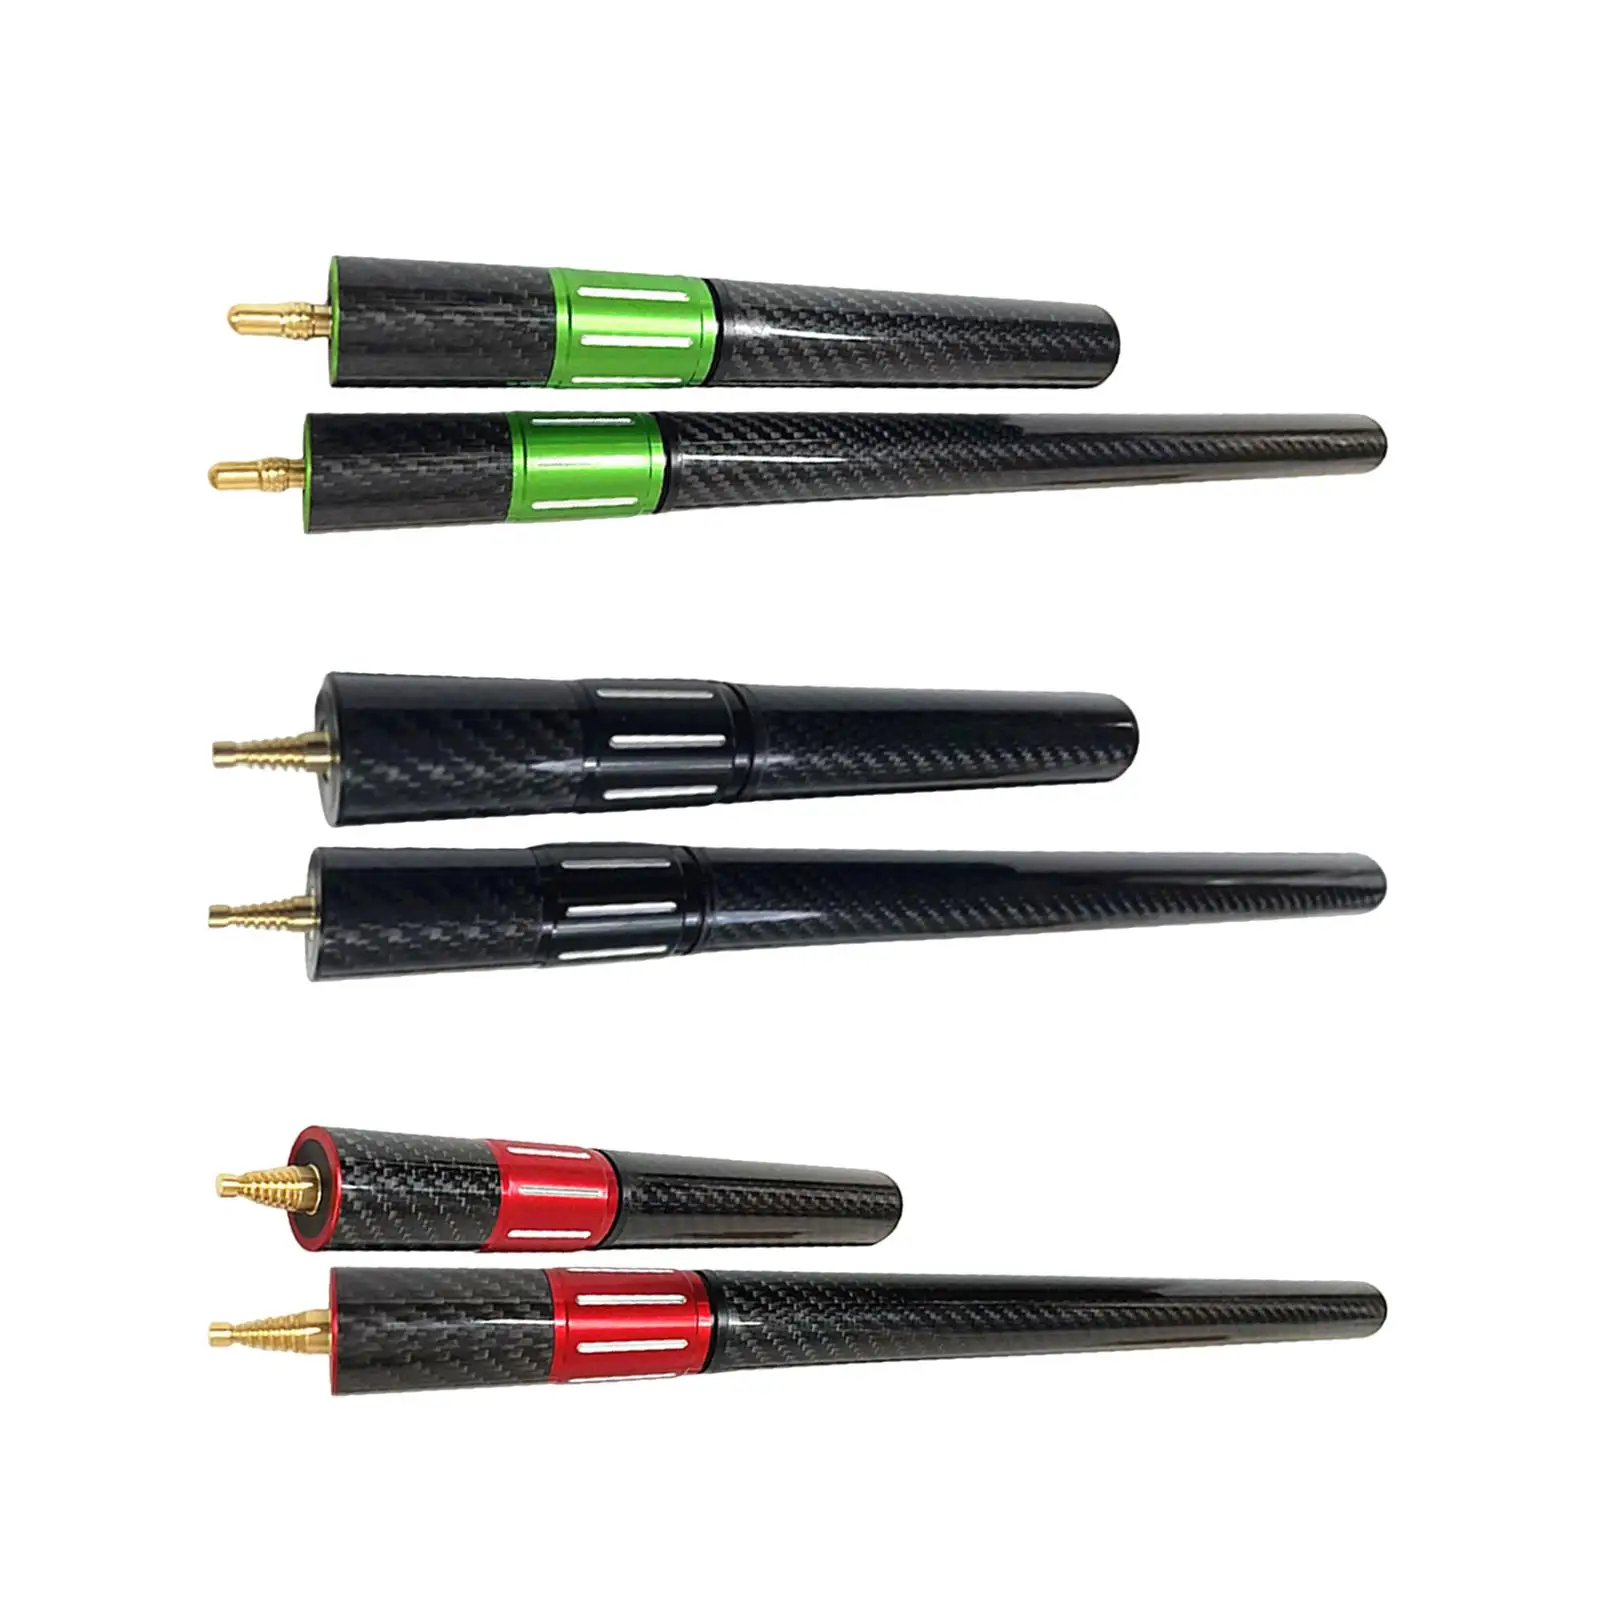 2Pcs Pool Cue Extender Telescopic Billiards Pool Cue Extension Compact Cue End Lengthener for Adult Billiard Accessories